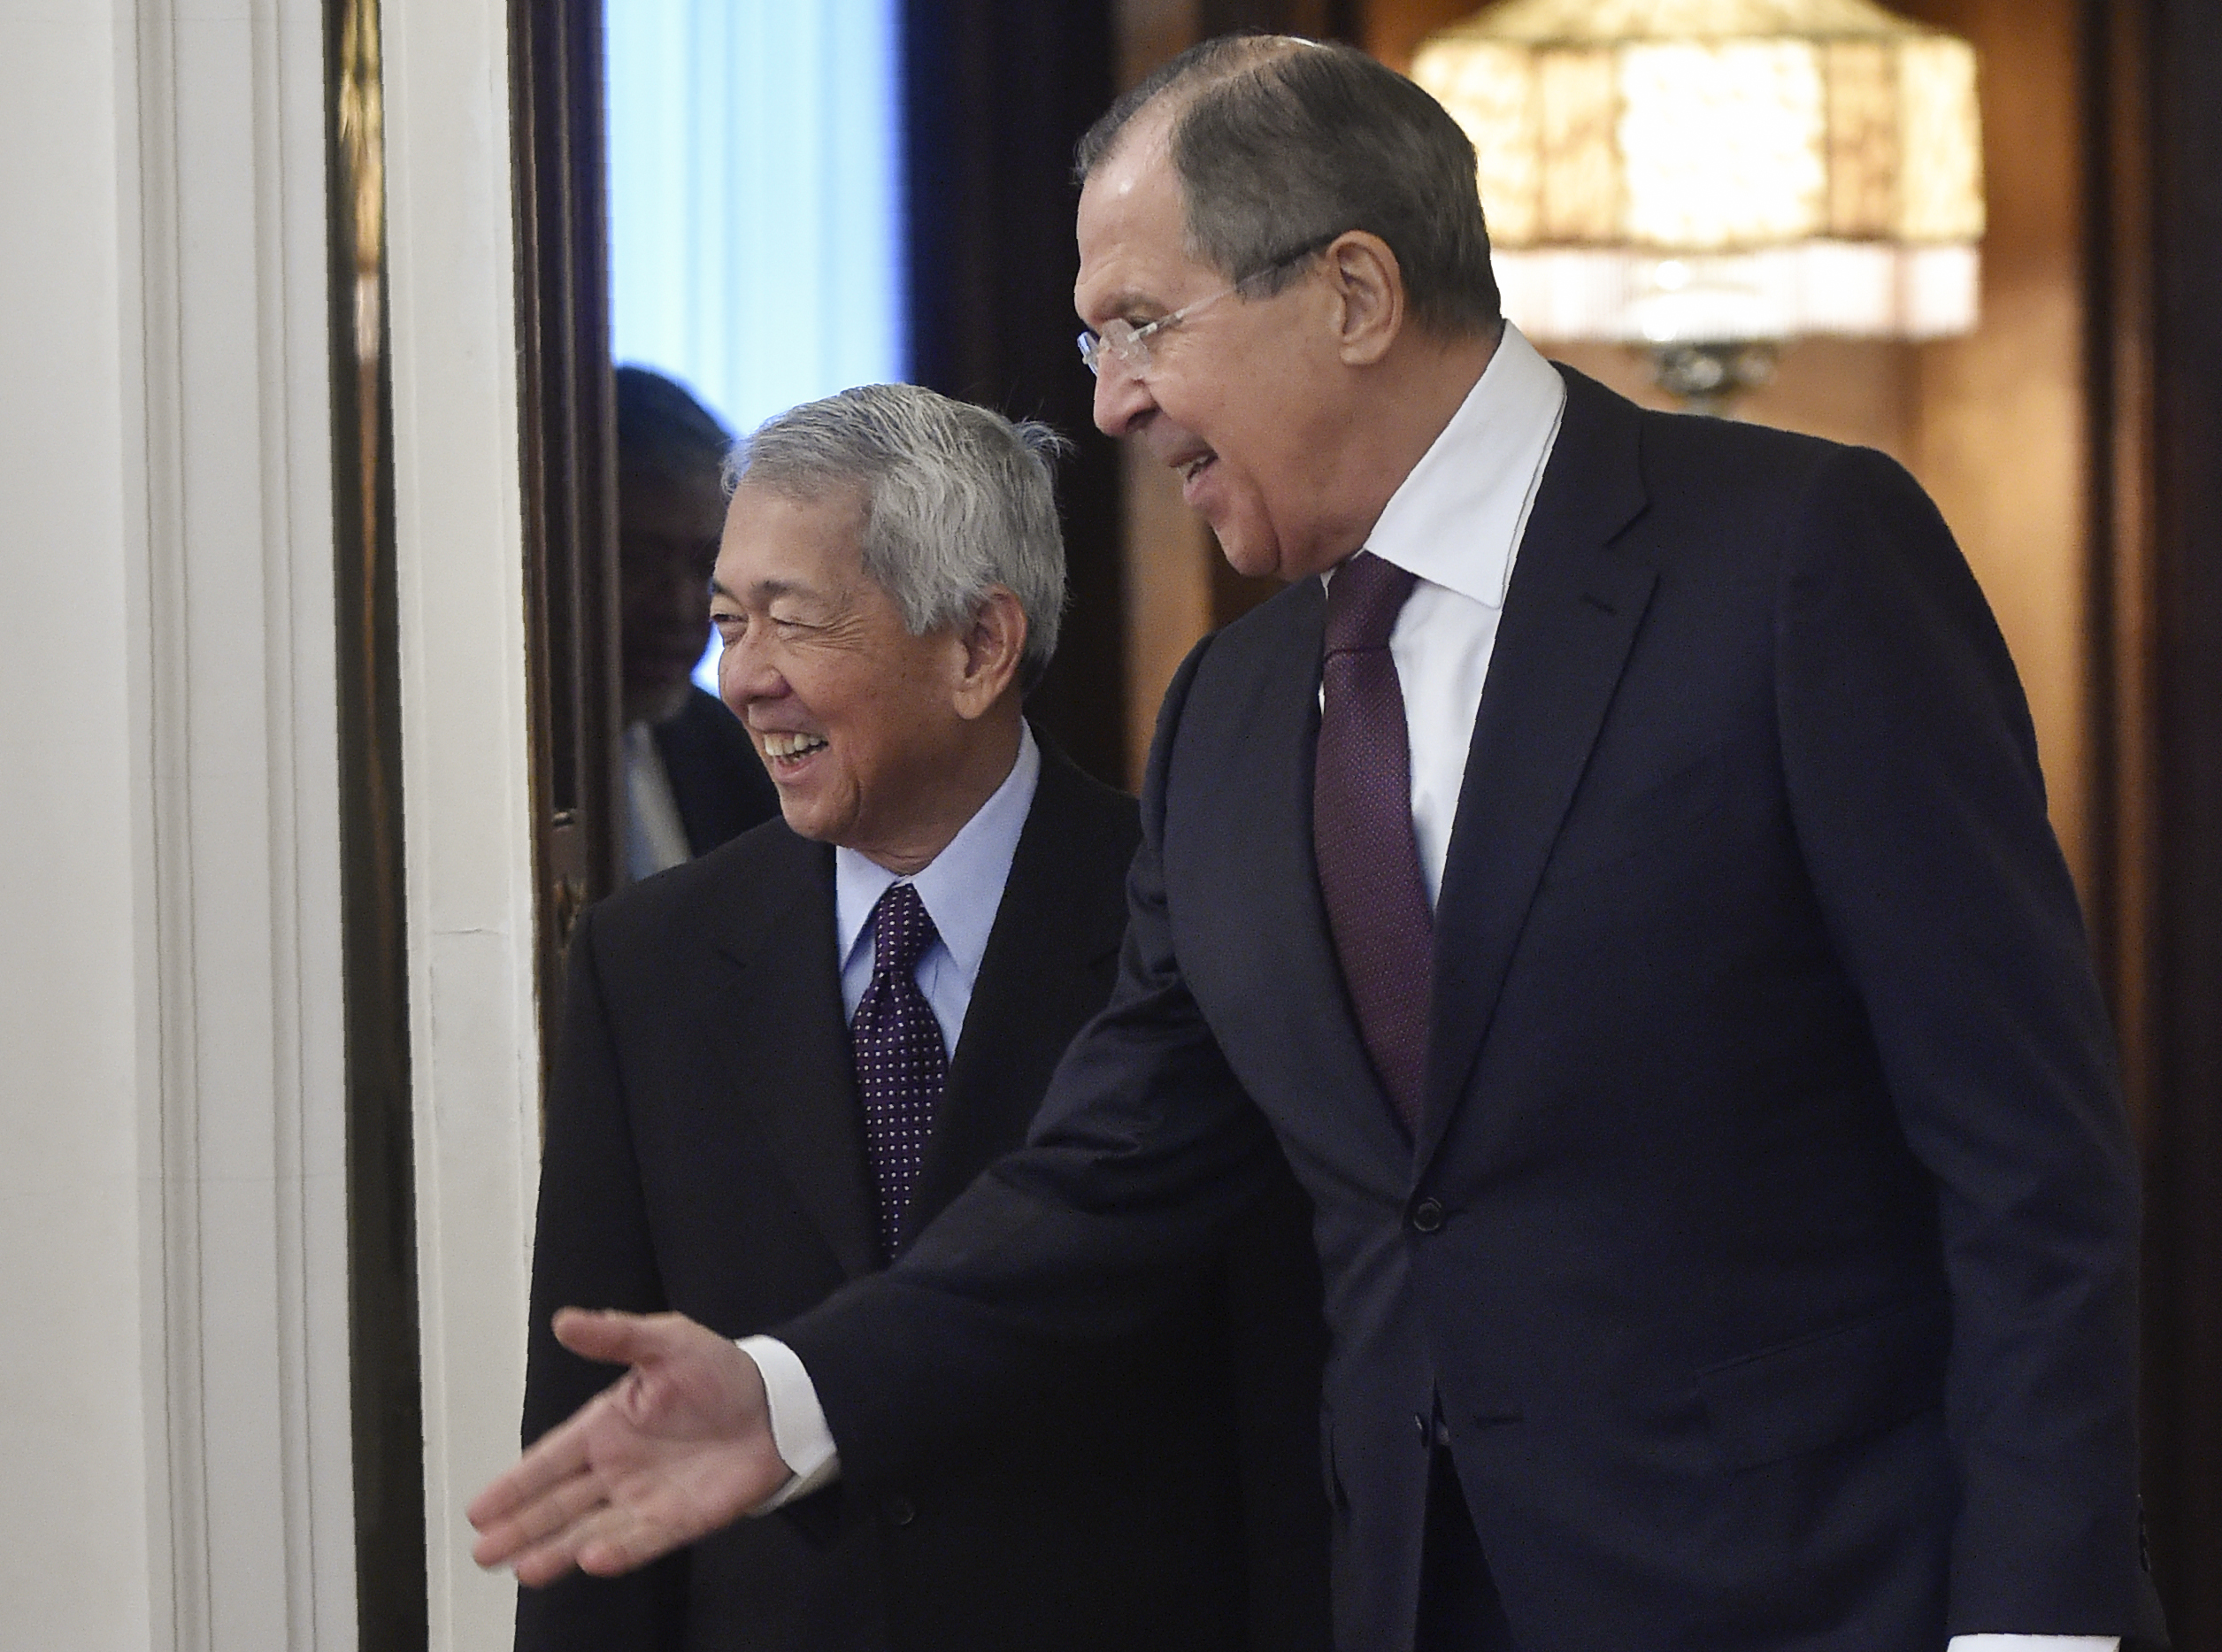 Russian Foreign Minister Sergei Lavrov (R) welcomes his Philippine counterpart Perfecto Yasay prior to their meeting in Moscow on December 5, 2016. / AFP PHOTO / Natalia KOLESNIKOVA